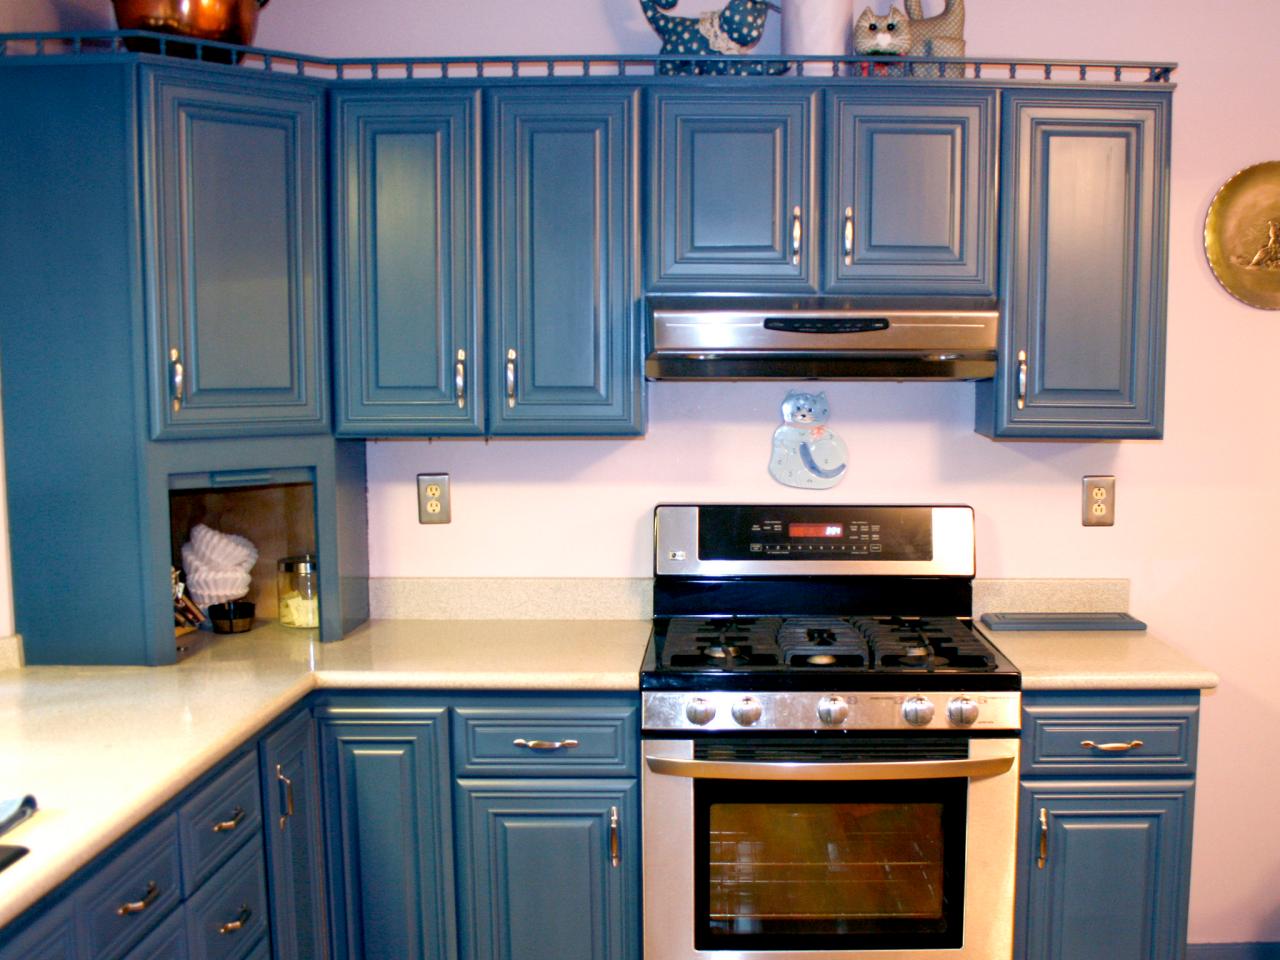 Spray Painting Kitchen Cabinets: Pictures & Ideas From HGTV | HGTV